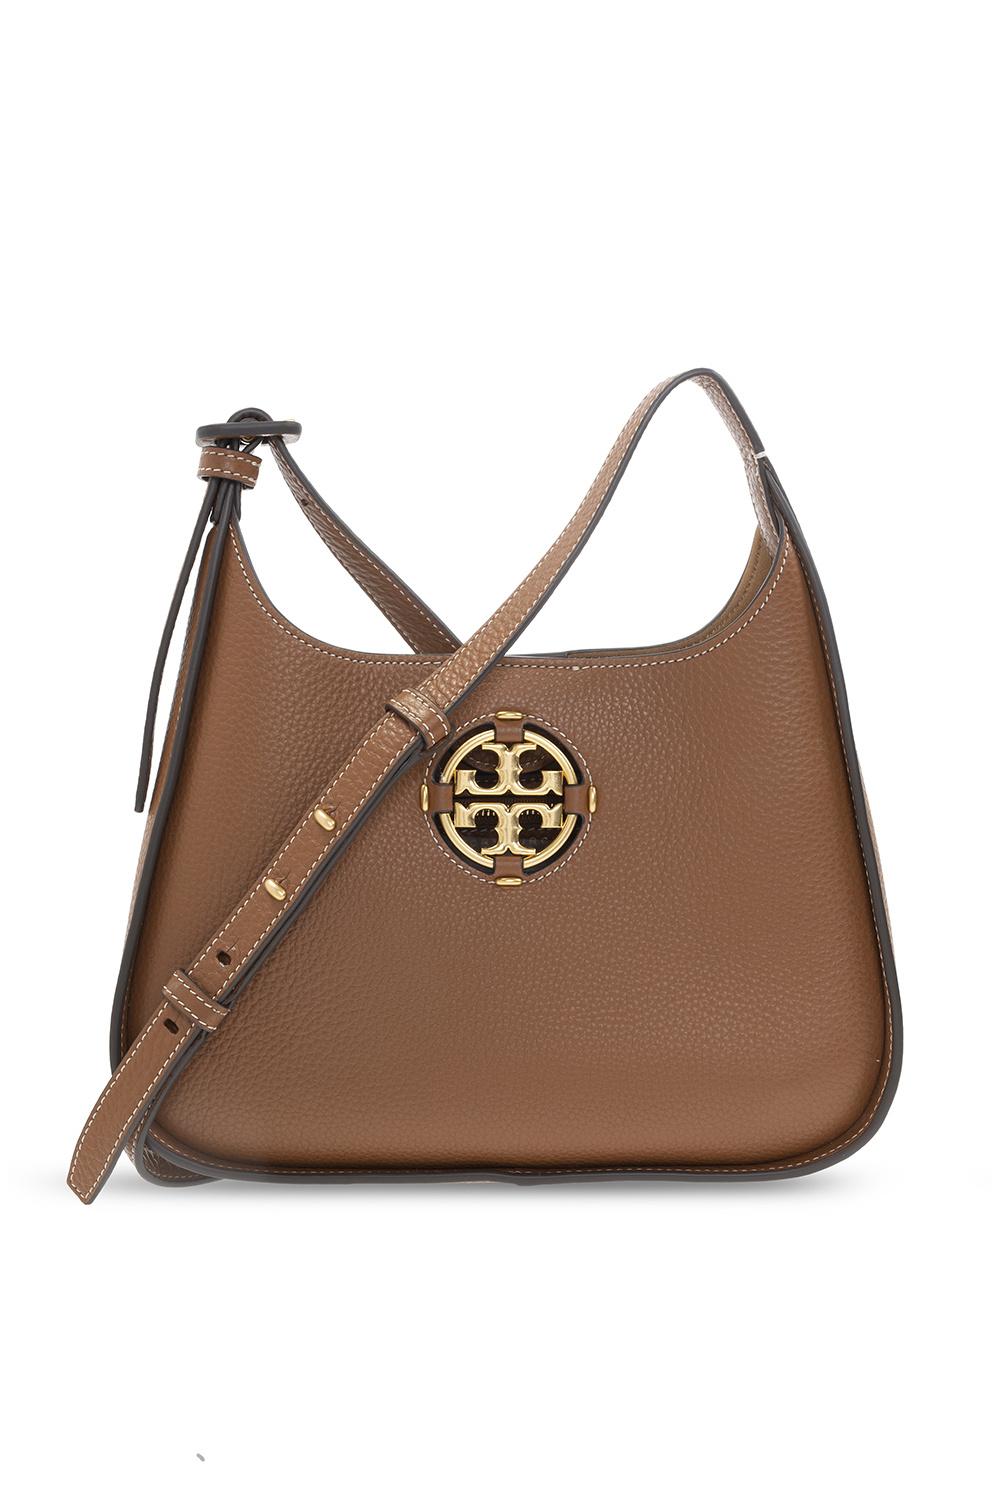 Tory Burch Miller Small Classic Shoulder Bag in Brown | Lyst